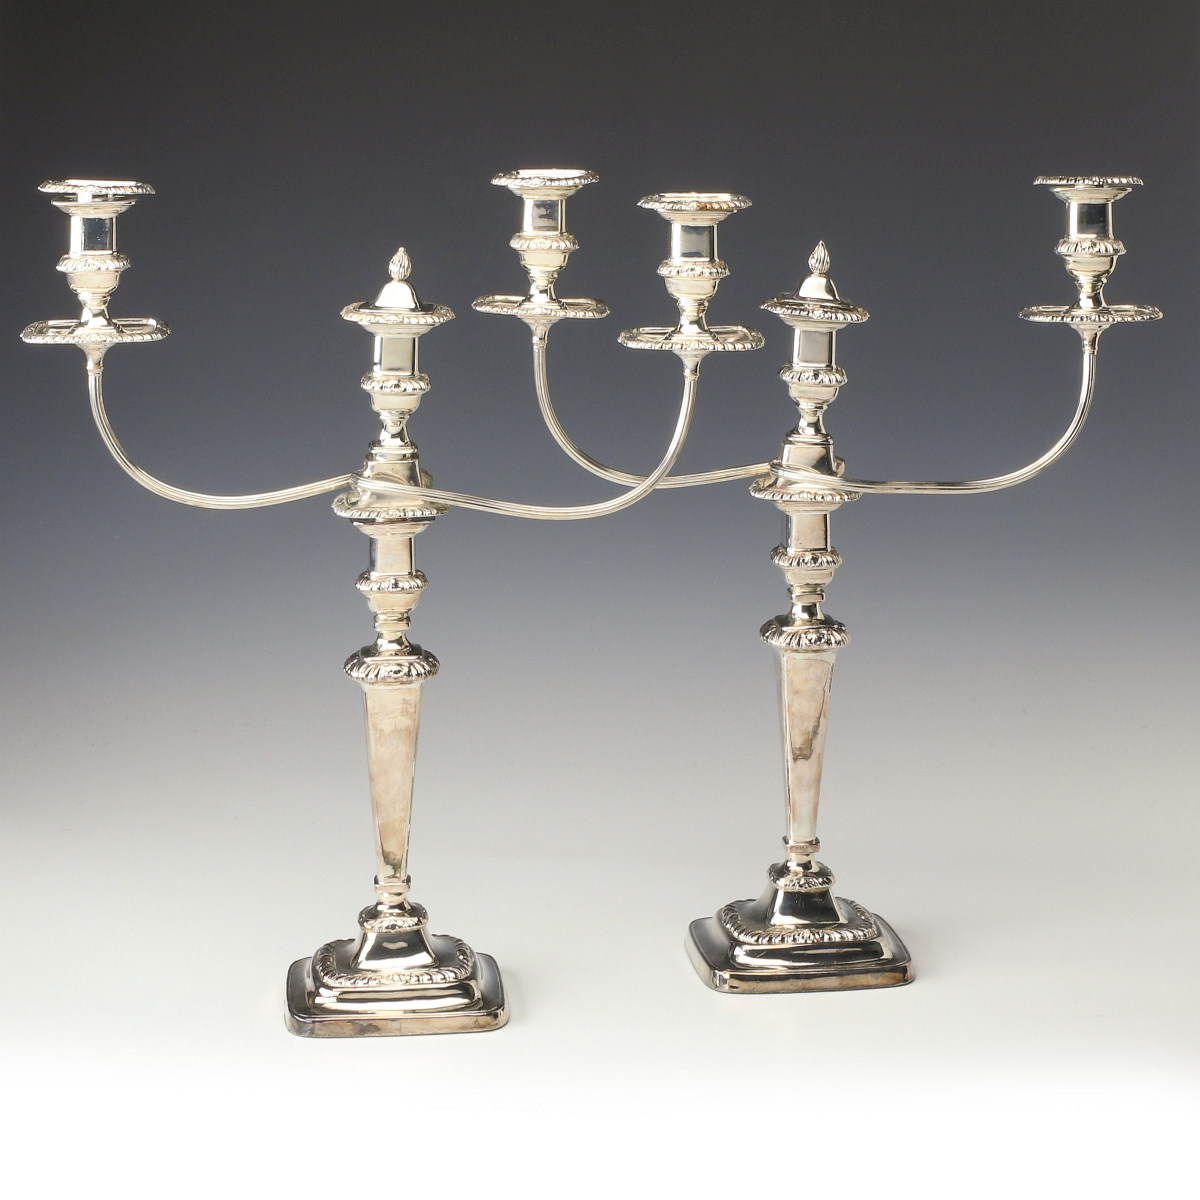 A PAIR OF LARGE GEORGIAN OLD SHEFFIELD PLATE CANDELABRA